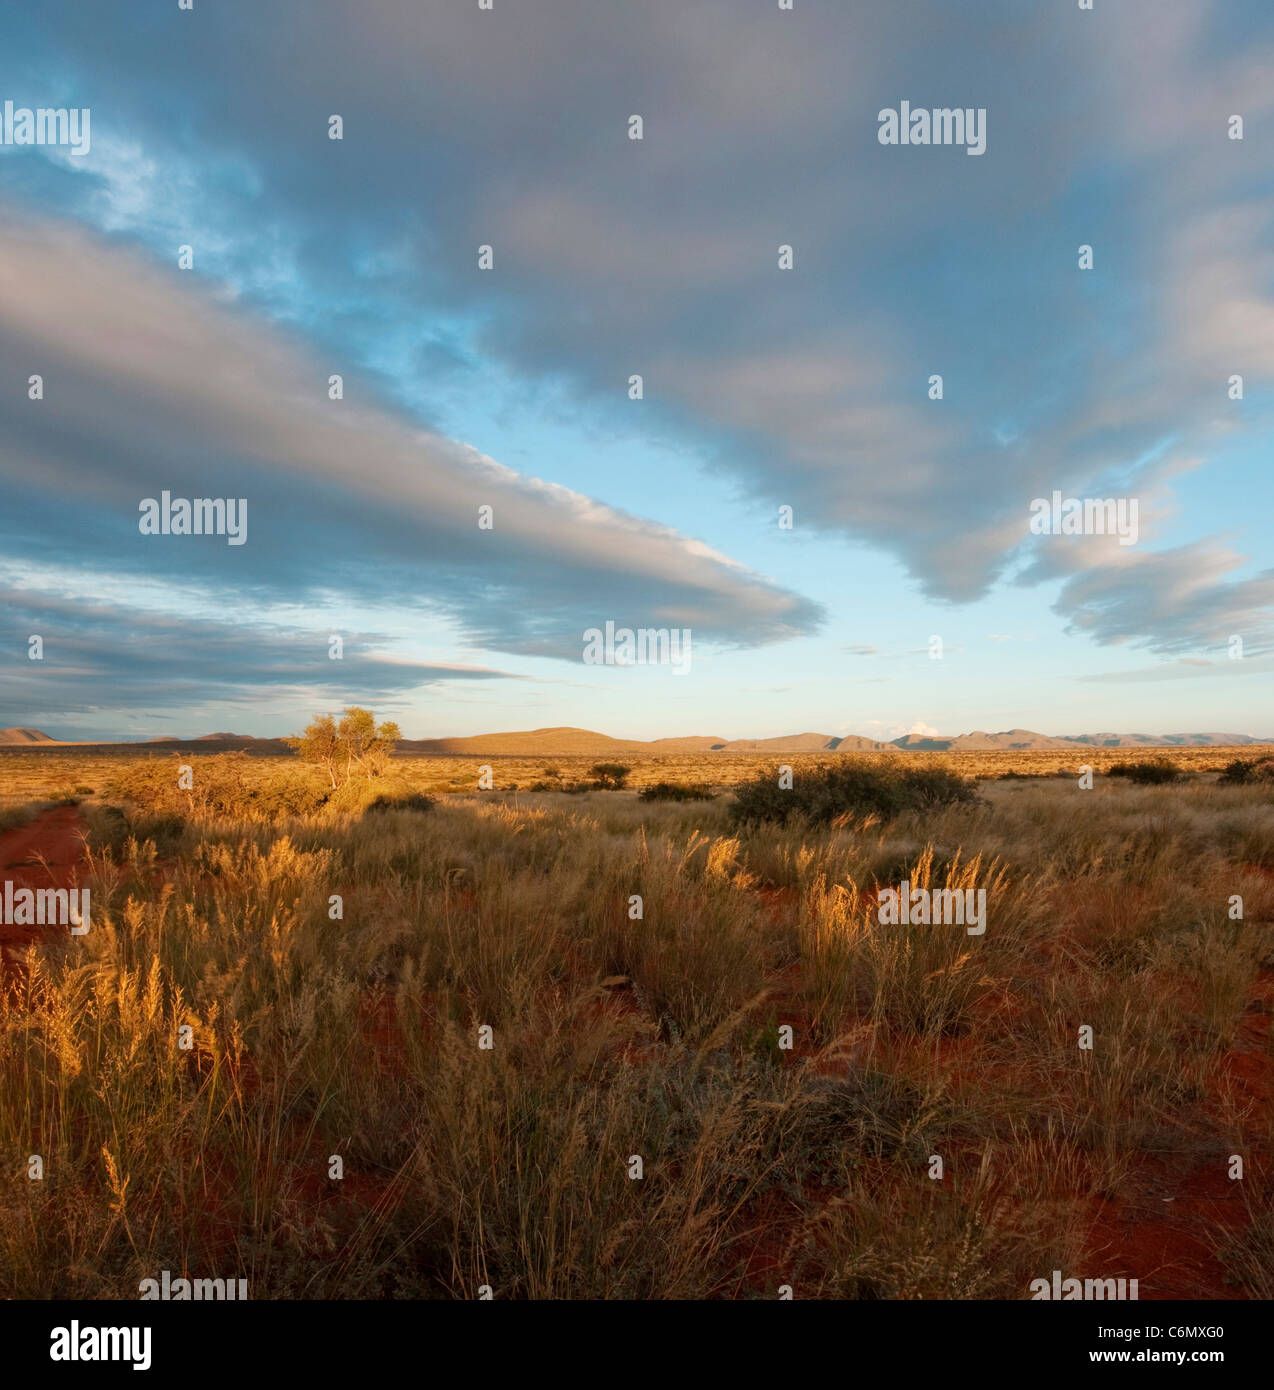 Sunset and cloud over dry grass plains Stock Photo